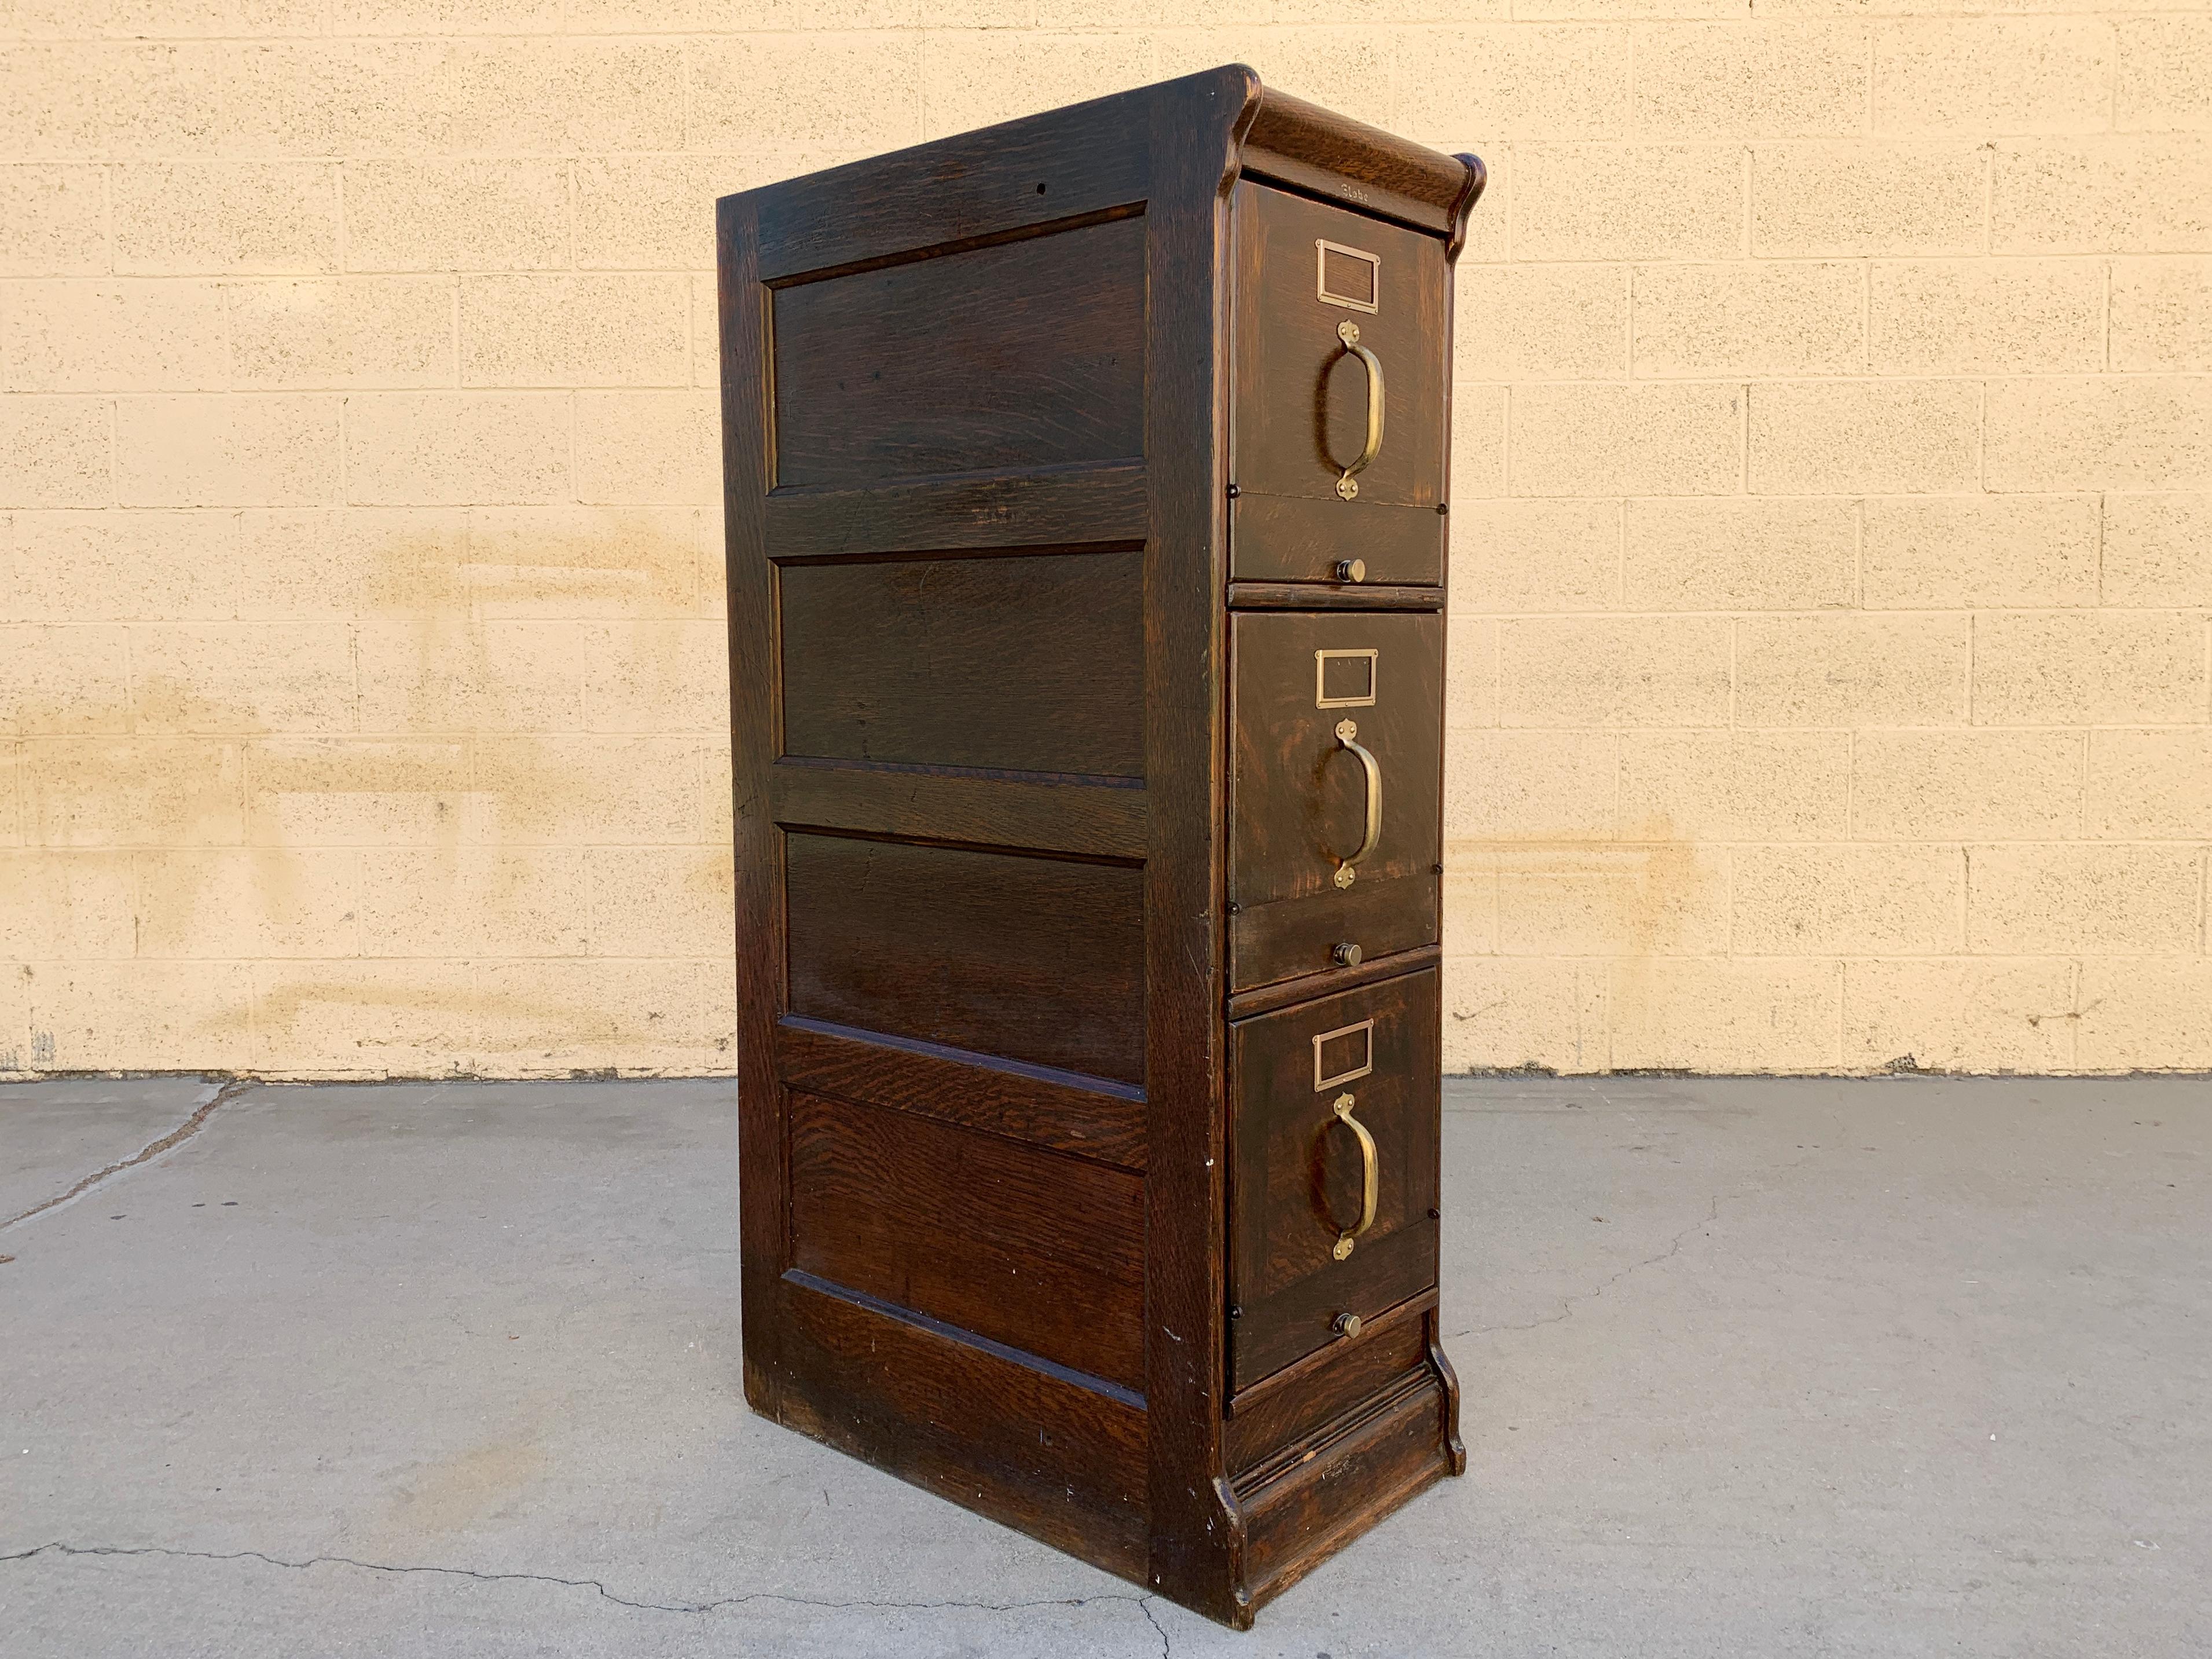 Antique American Globe Wernicke file cabinet composed of solid golden oak, circa 1900. This 3-drawer vertical unit is a beauty. Quality Globe Wernicke construction with a special design: tip out drawers. The face of each drawer can be folded open